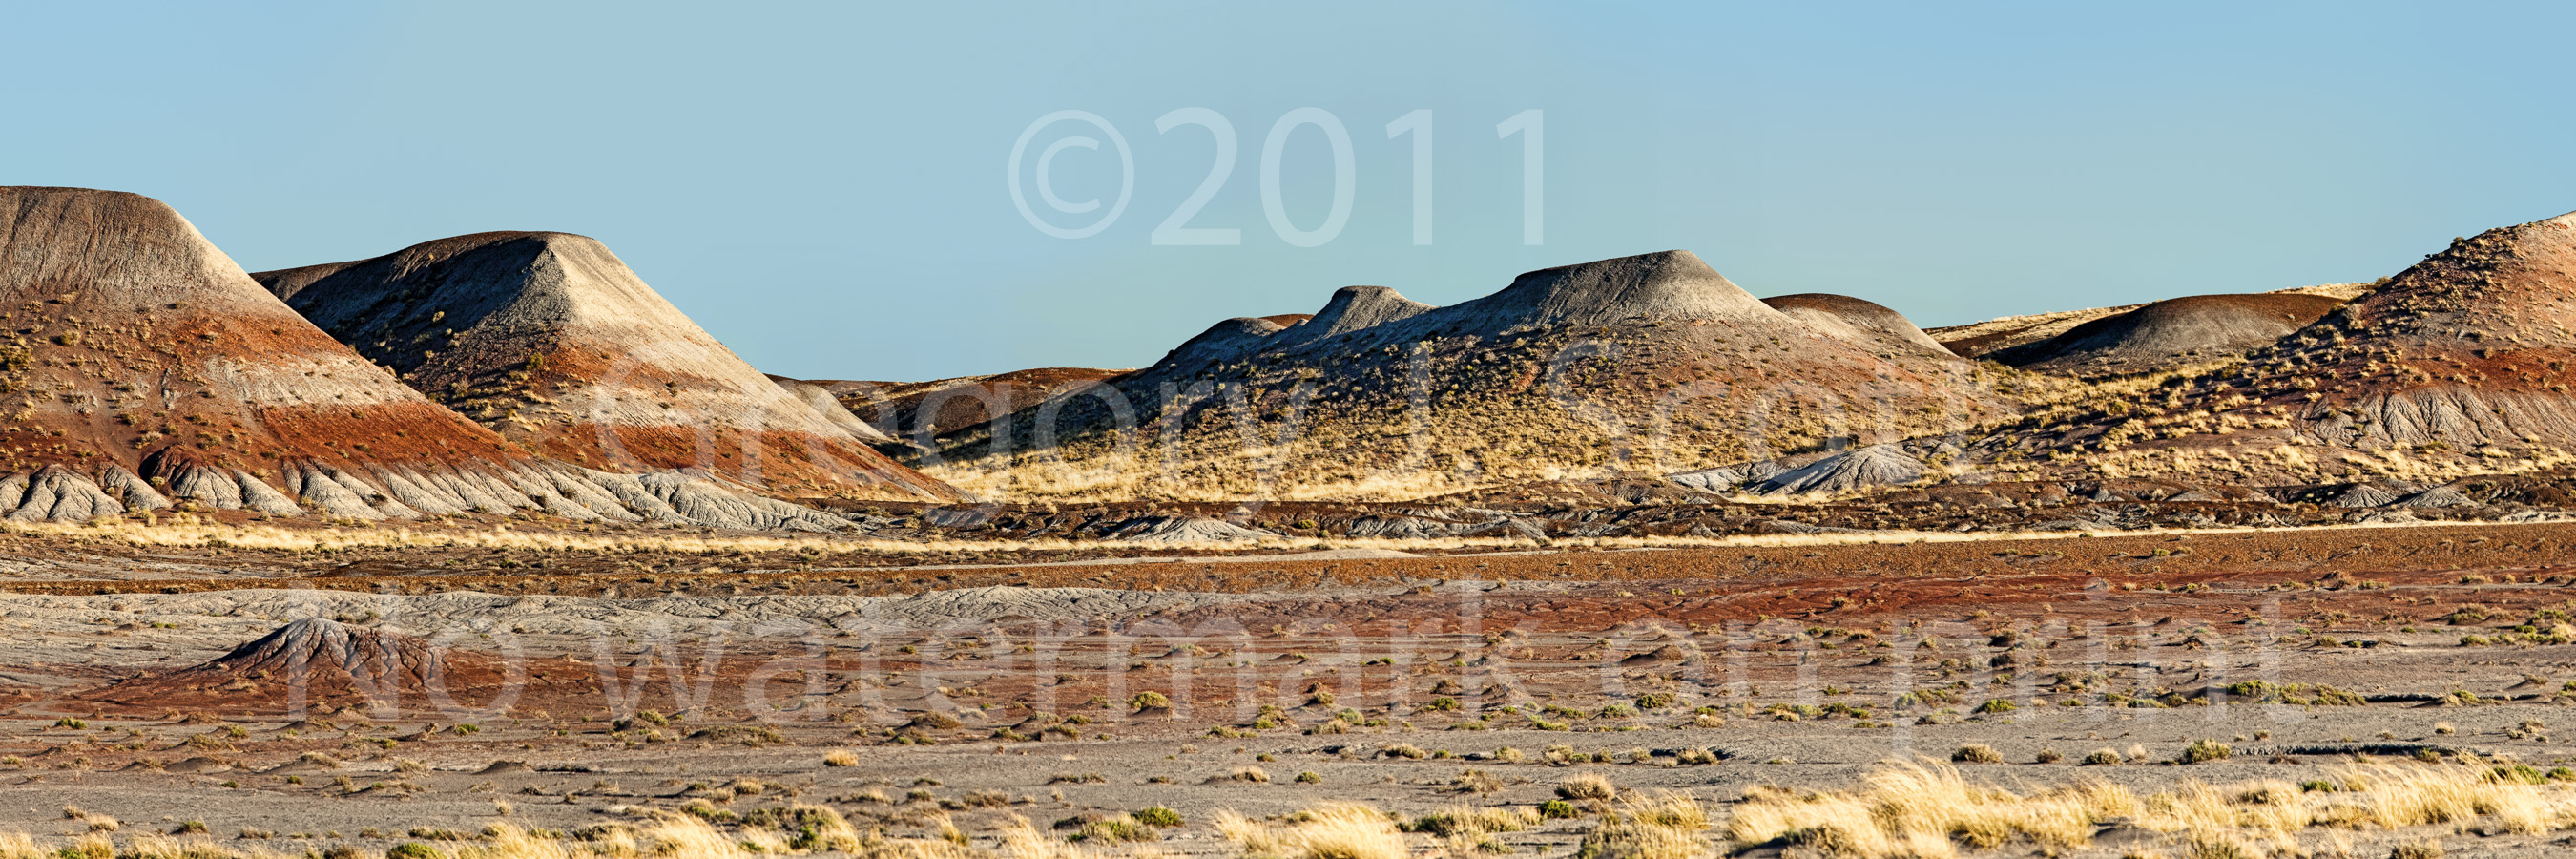 Painted Desert Hills, Photographed May 5, 2011